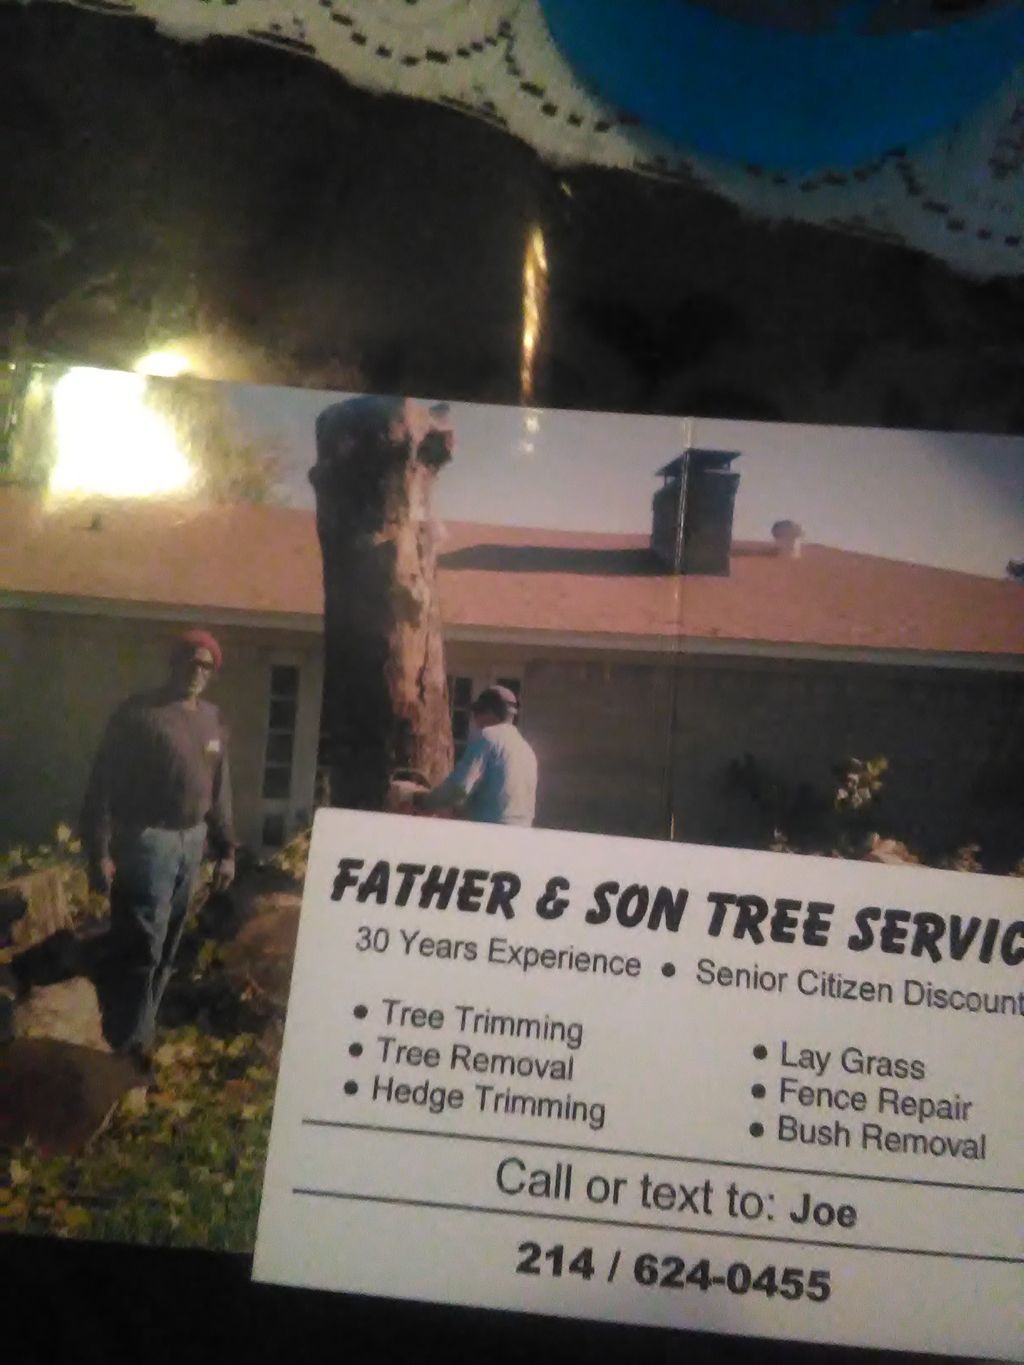 Father & Son Tree Service